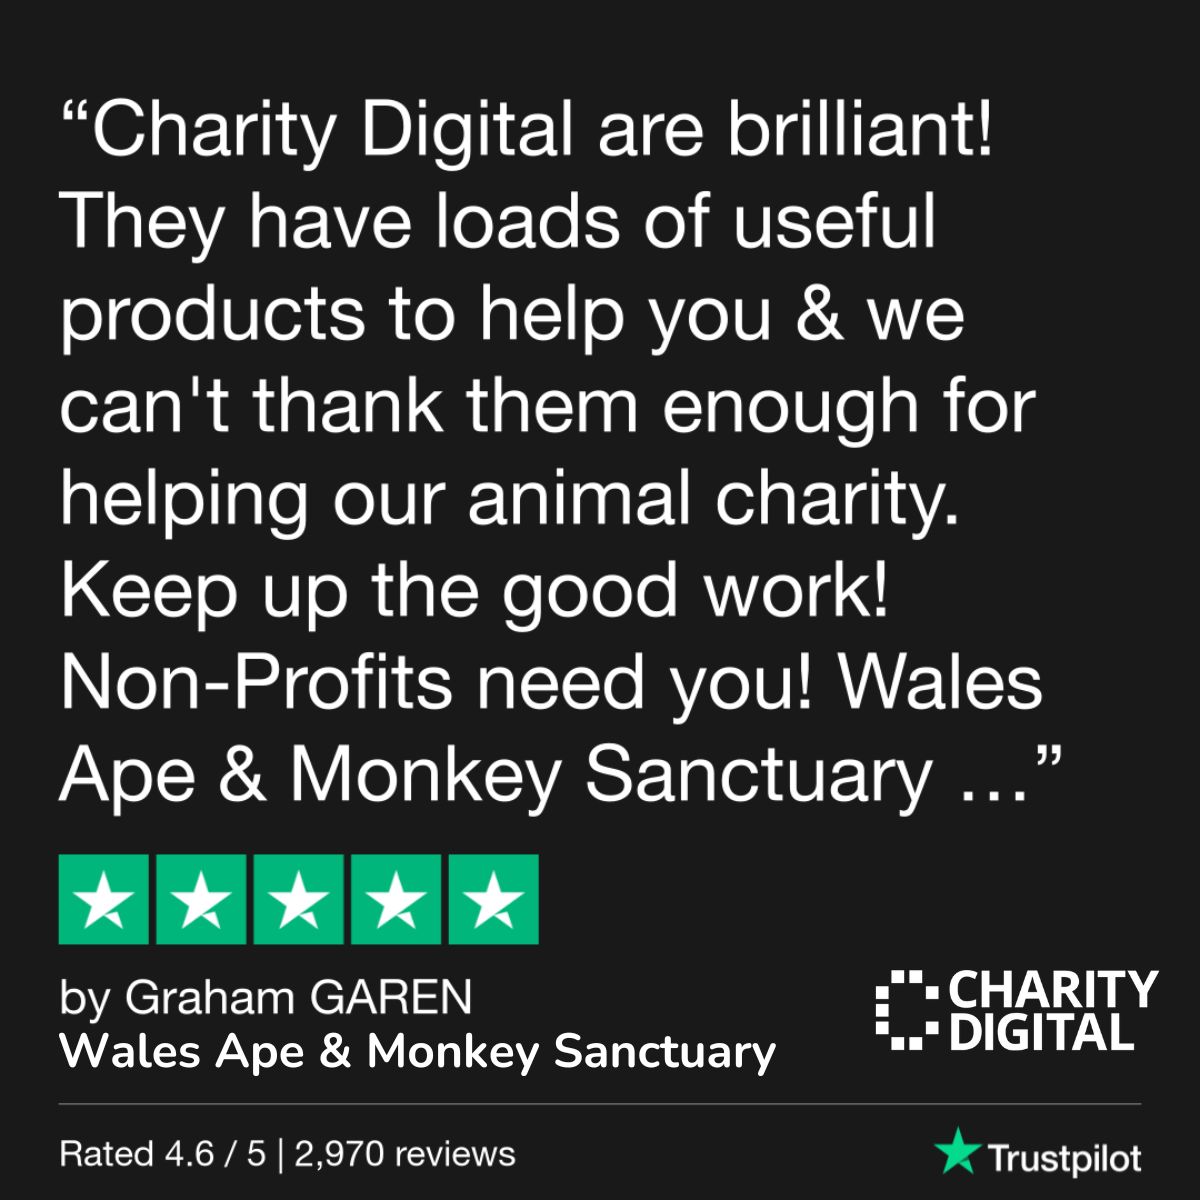 Thank you Wales Ape and Monkey Sanctuary, for your kind trustpilot review! Find out more about us here ⬇️ charitydigital.org.uk/about-us #CharityDigital #NonProfit #Trustpilot #CustomerReviews #FreeTech